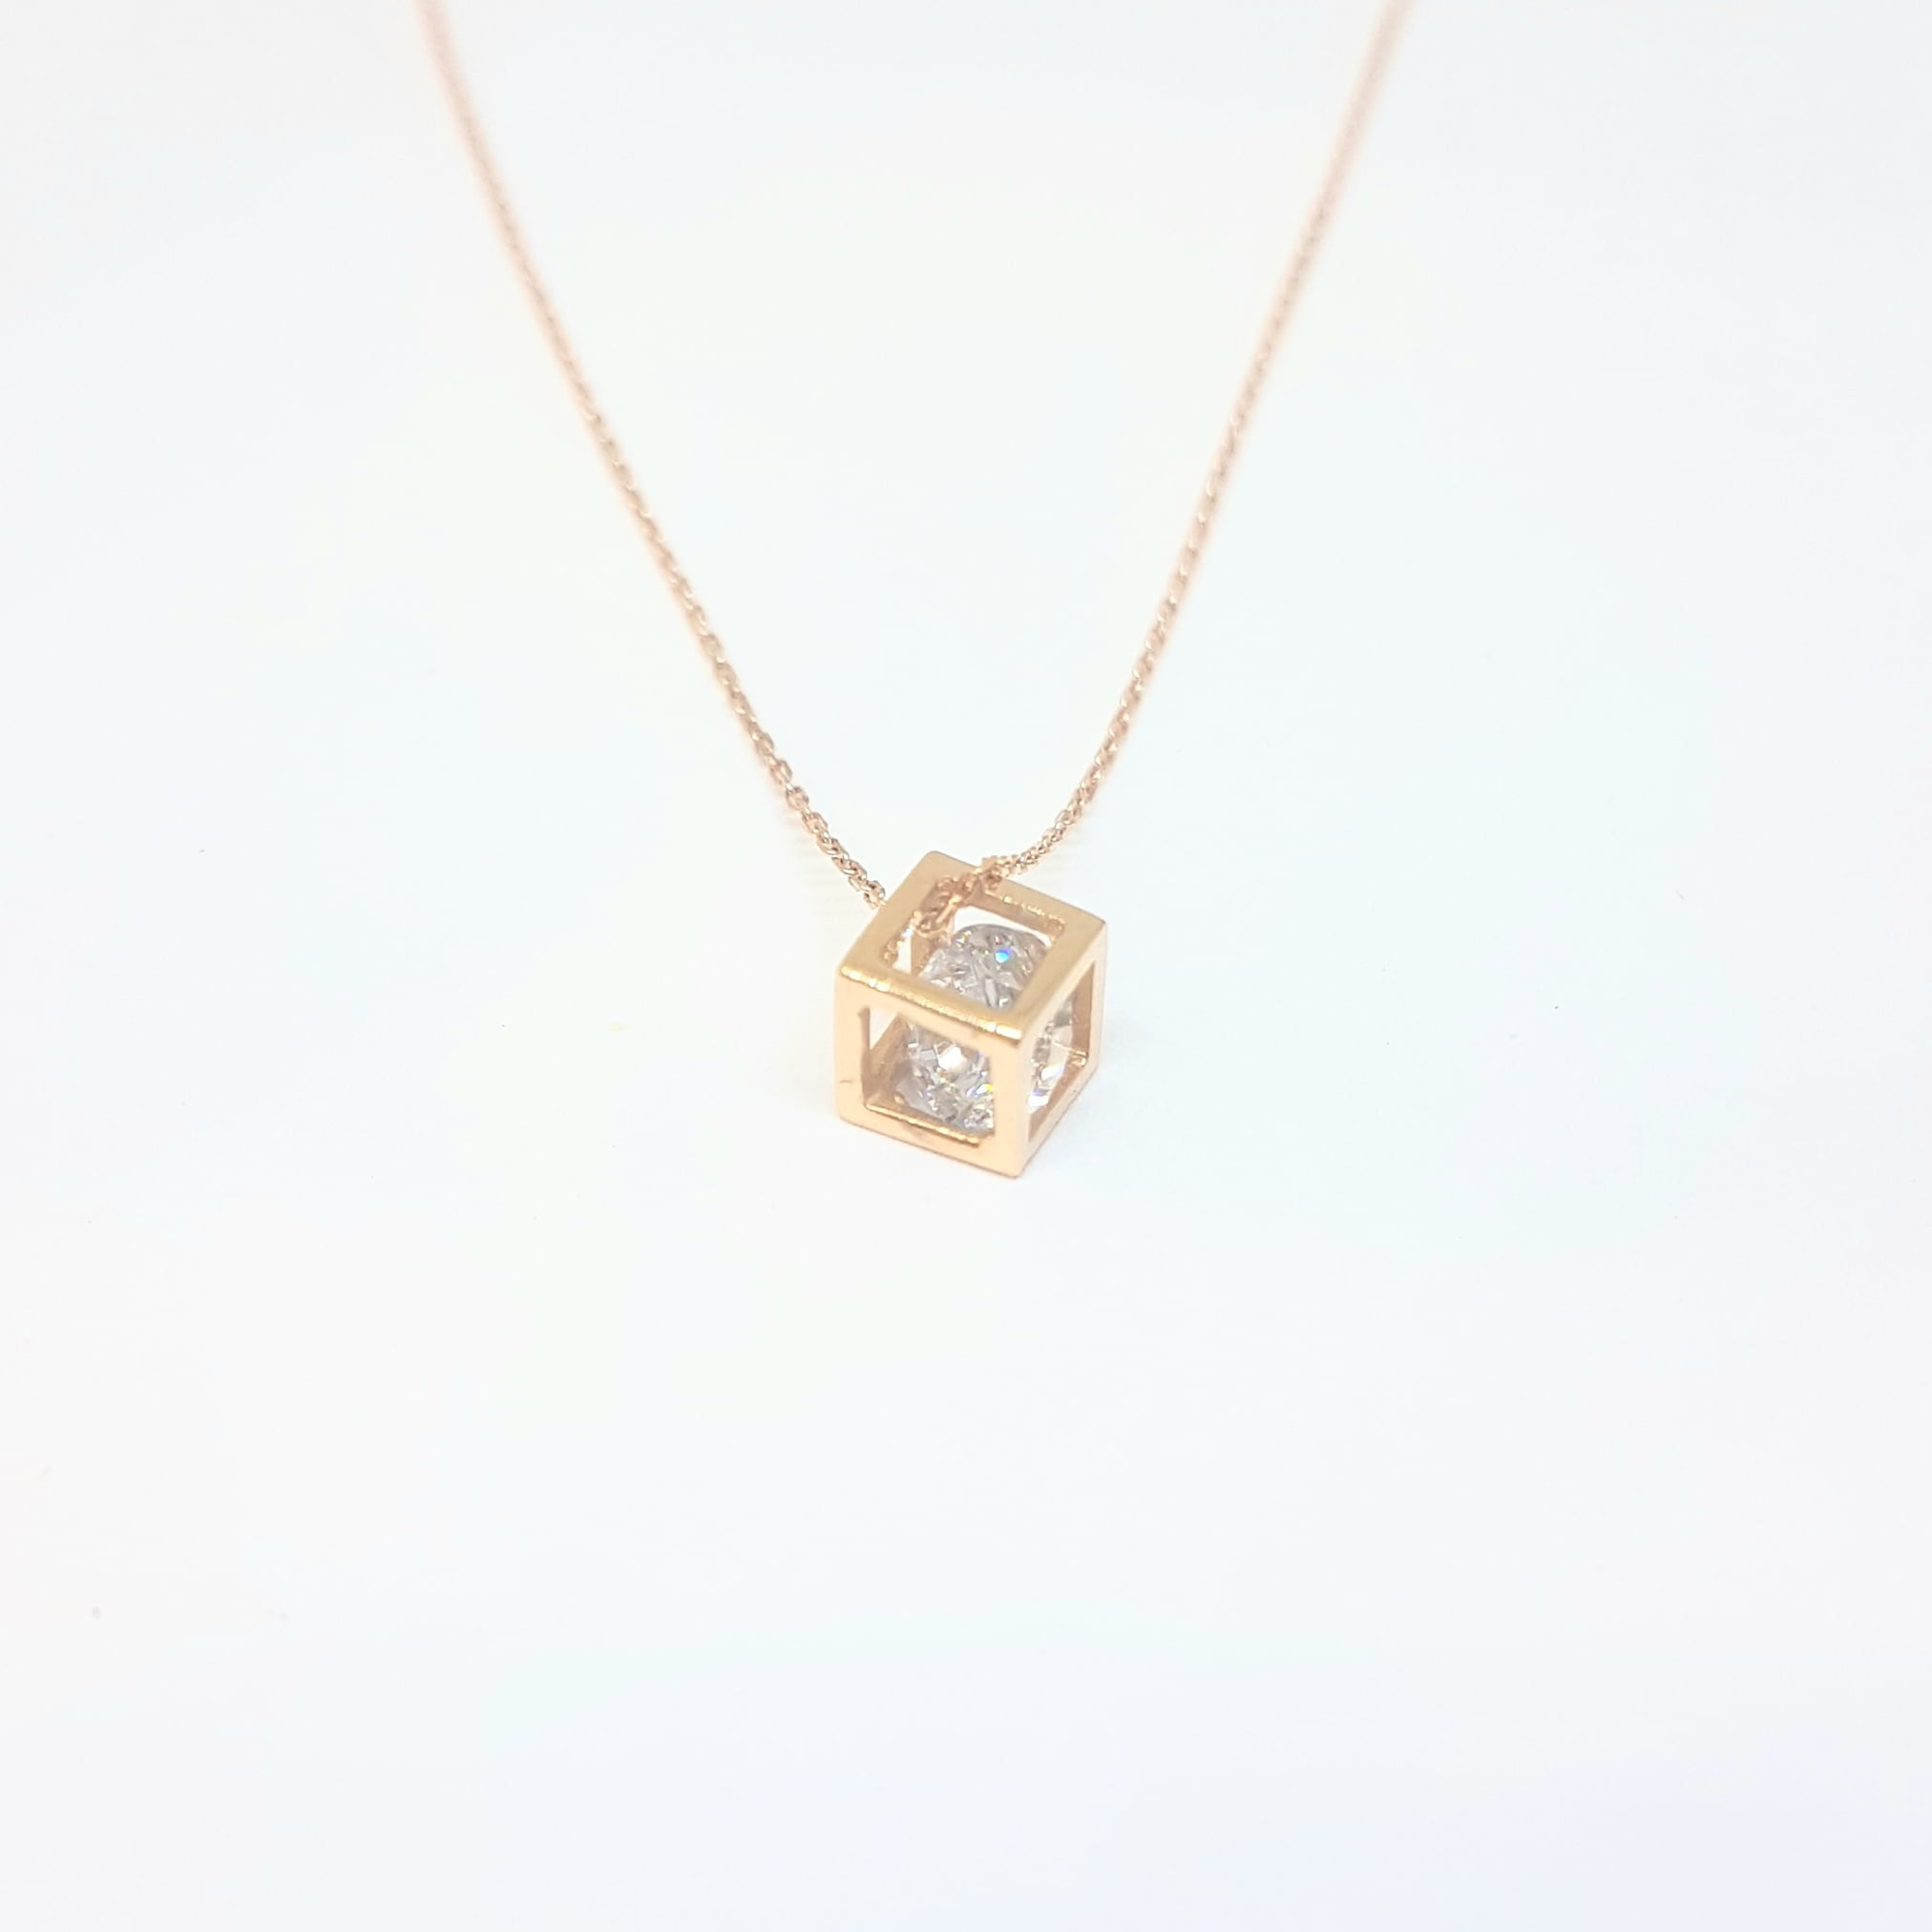 Women's Girls Rose Gold Small  Cube Pendant Necklace With Crystal Elements Gift